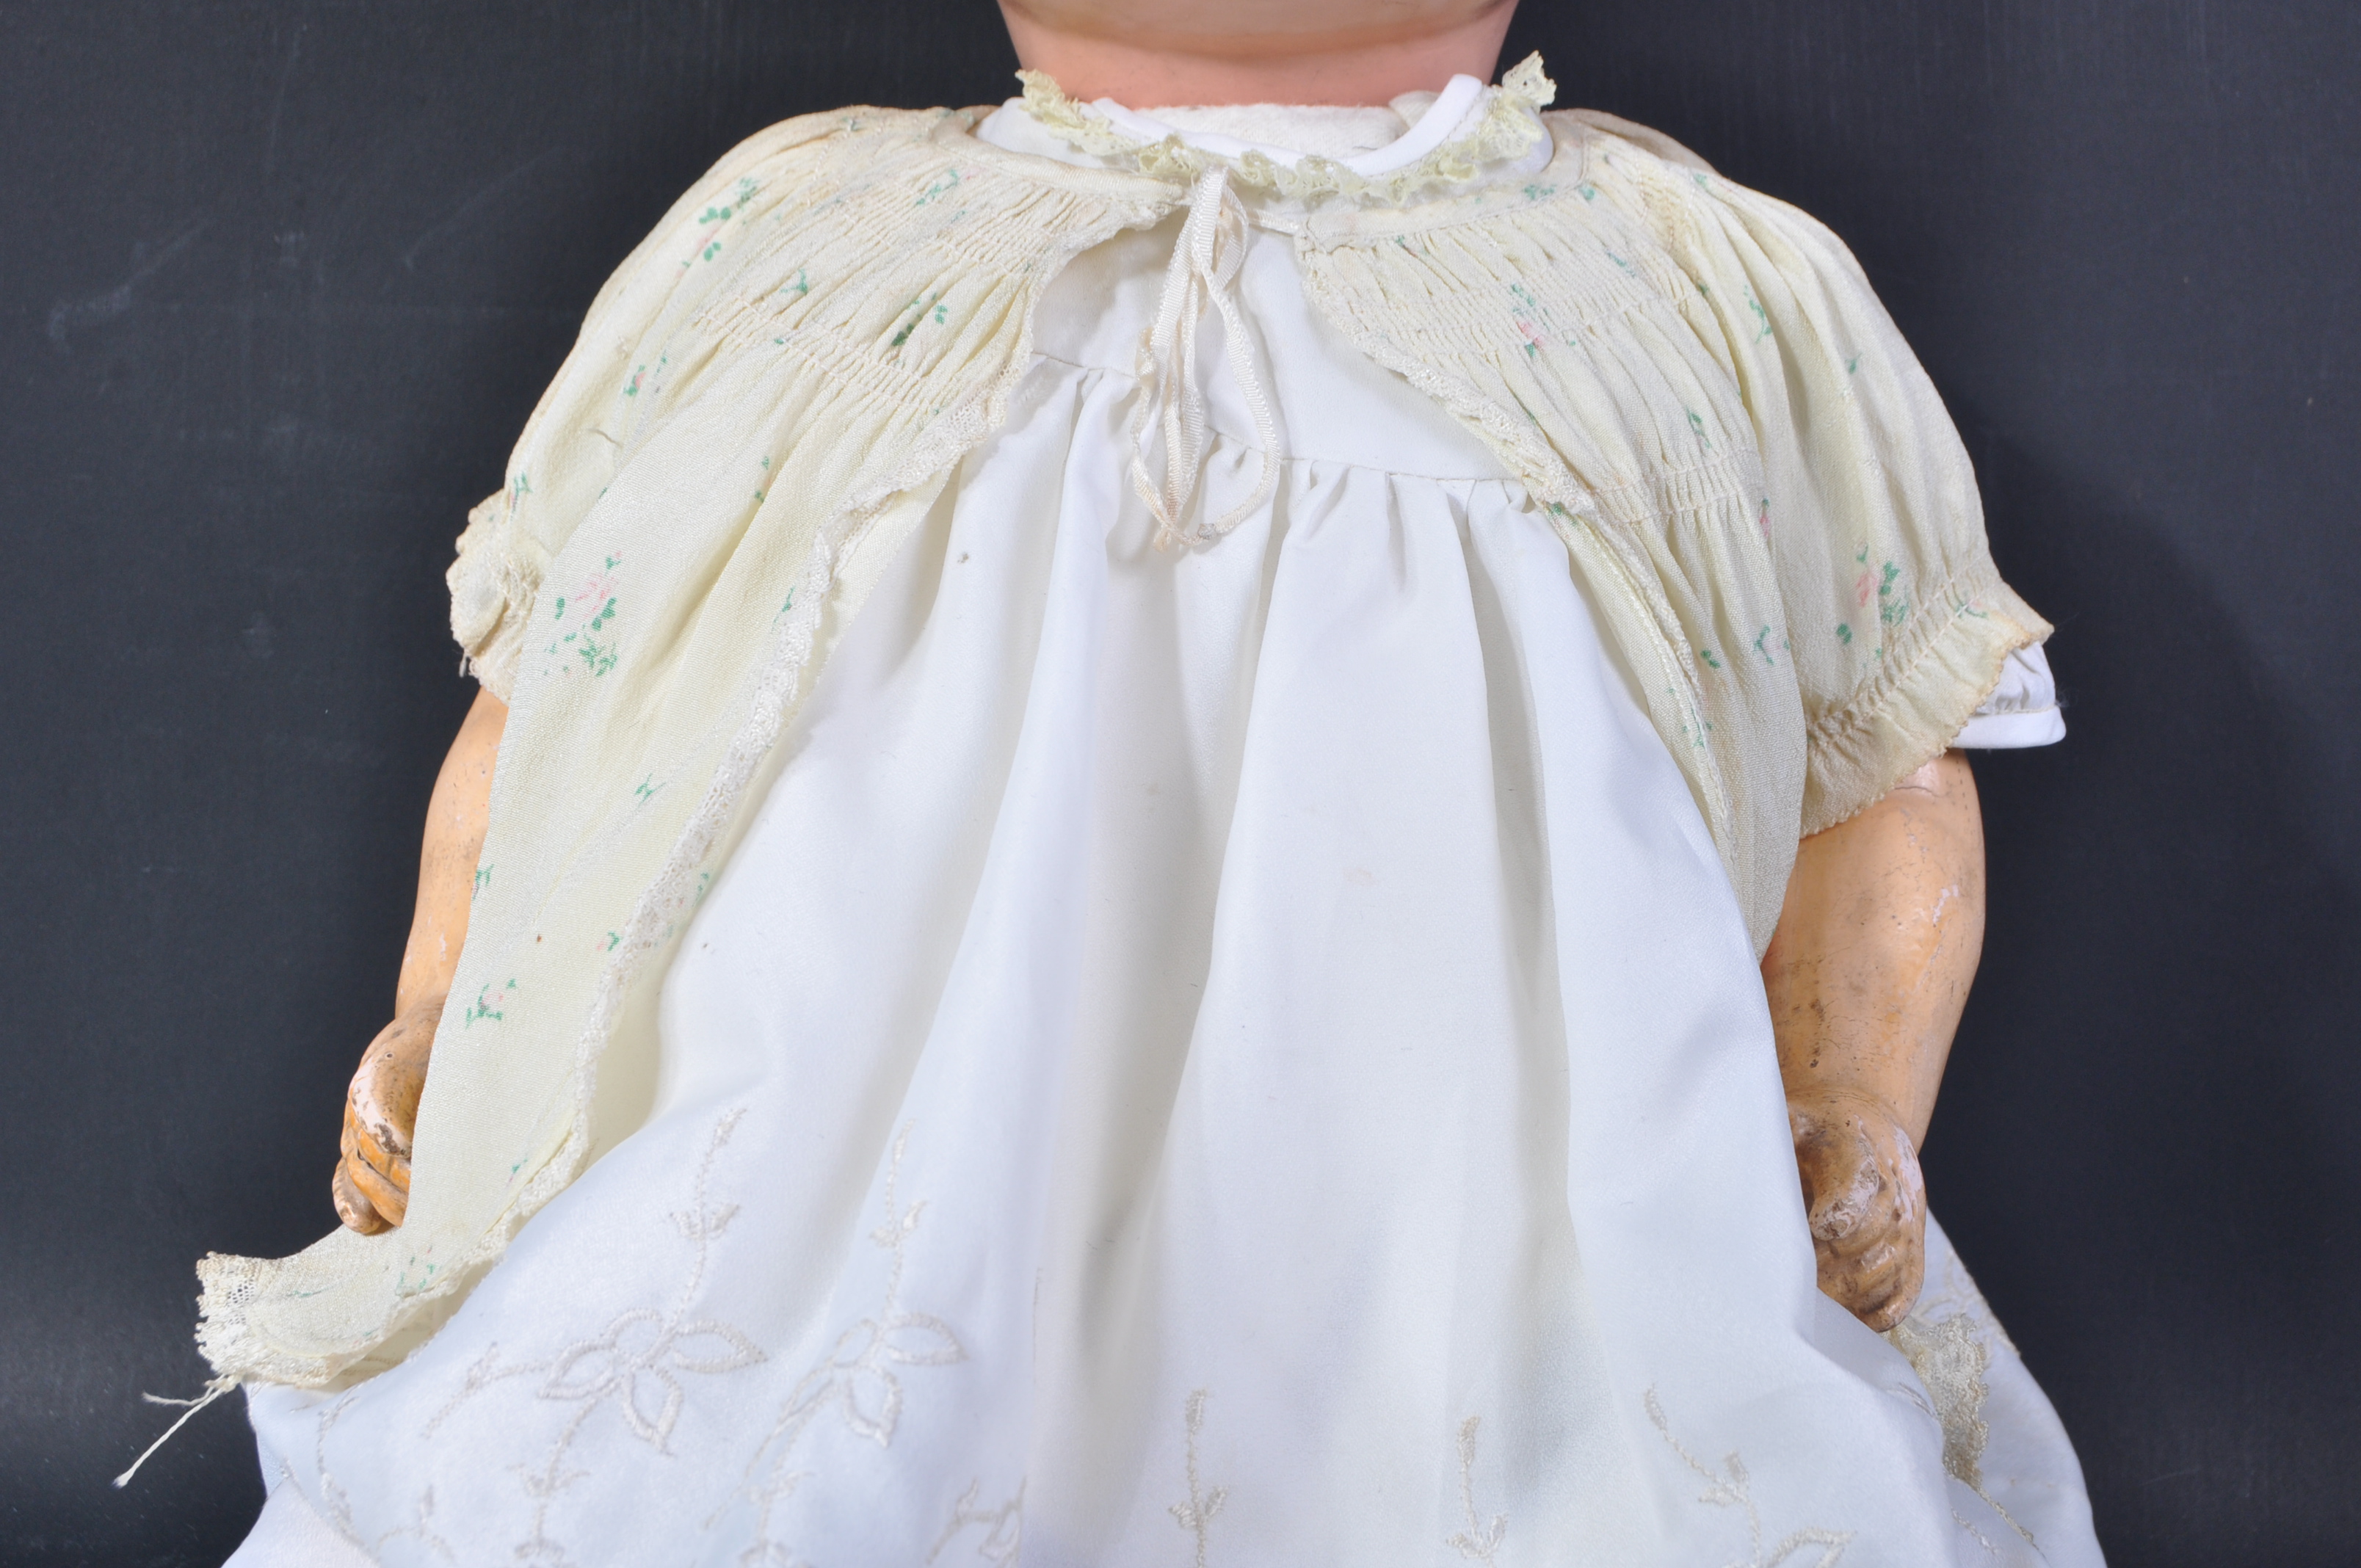 EARLY 20TH CENTURY BISQUE HEADED DOLL - Image 4 of 6